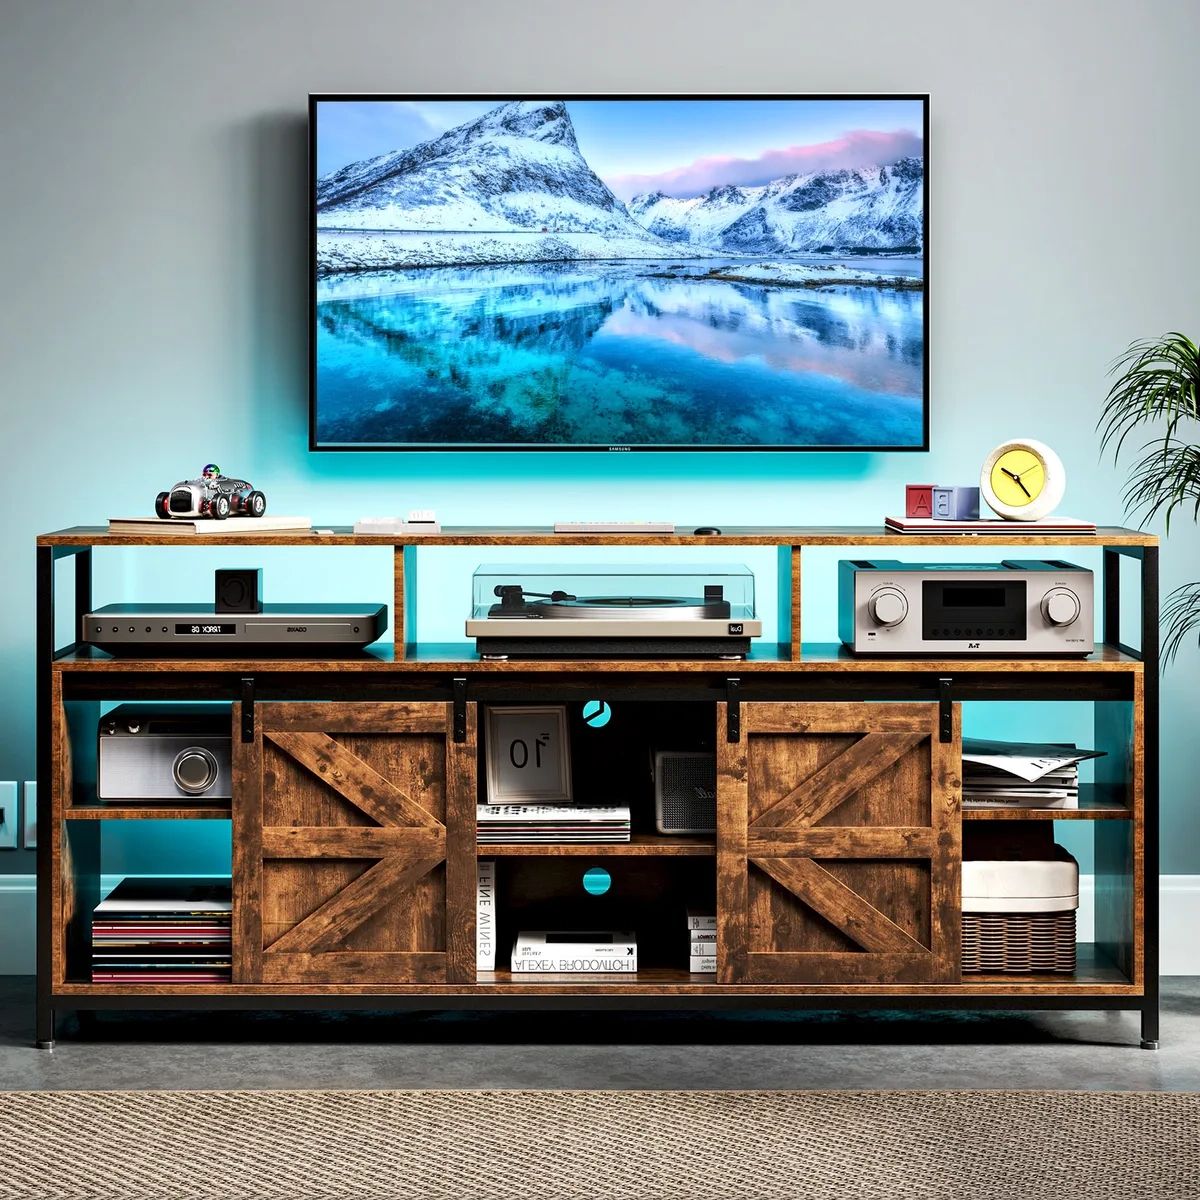 Tc Homeny Tv Stand With Power Station + Rgb Led Tv Cabinet Entertainment  Center | Ebay Throughout Rgb Tv Entertainment Centers (View 16 of 20)